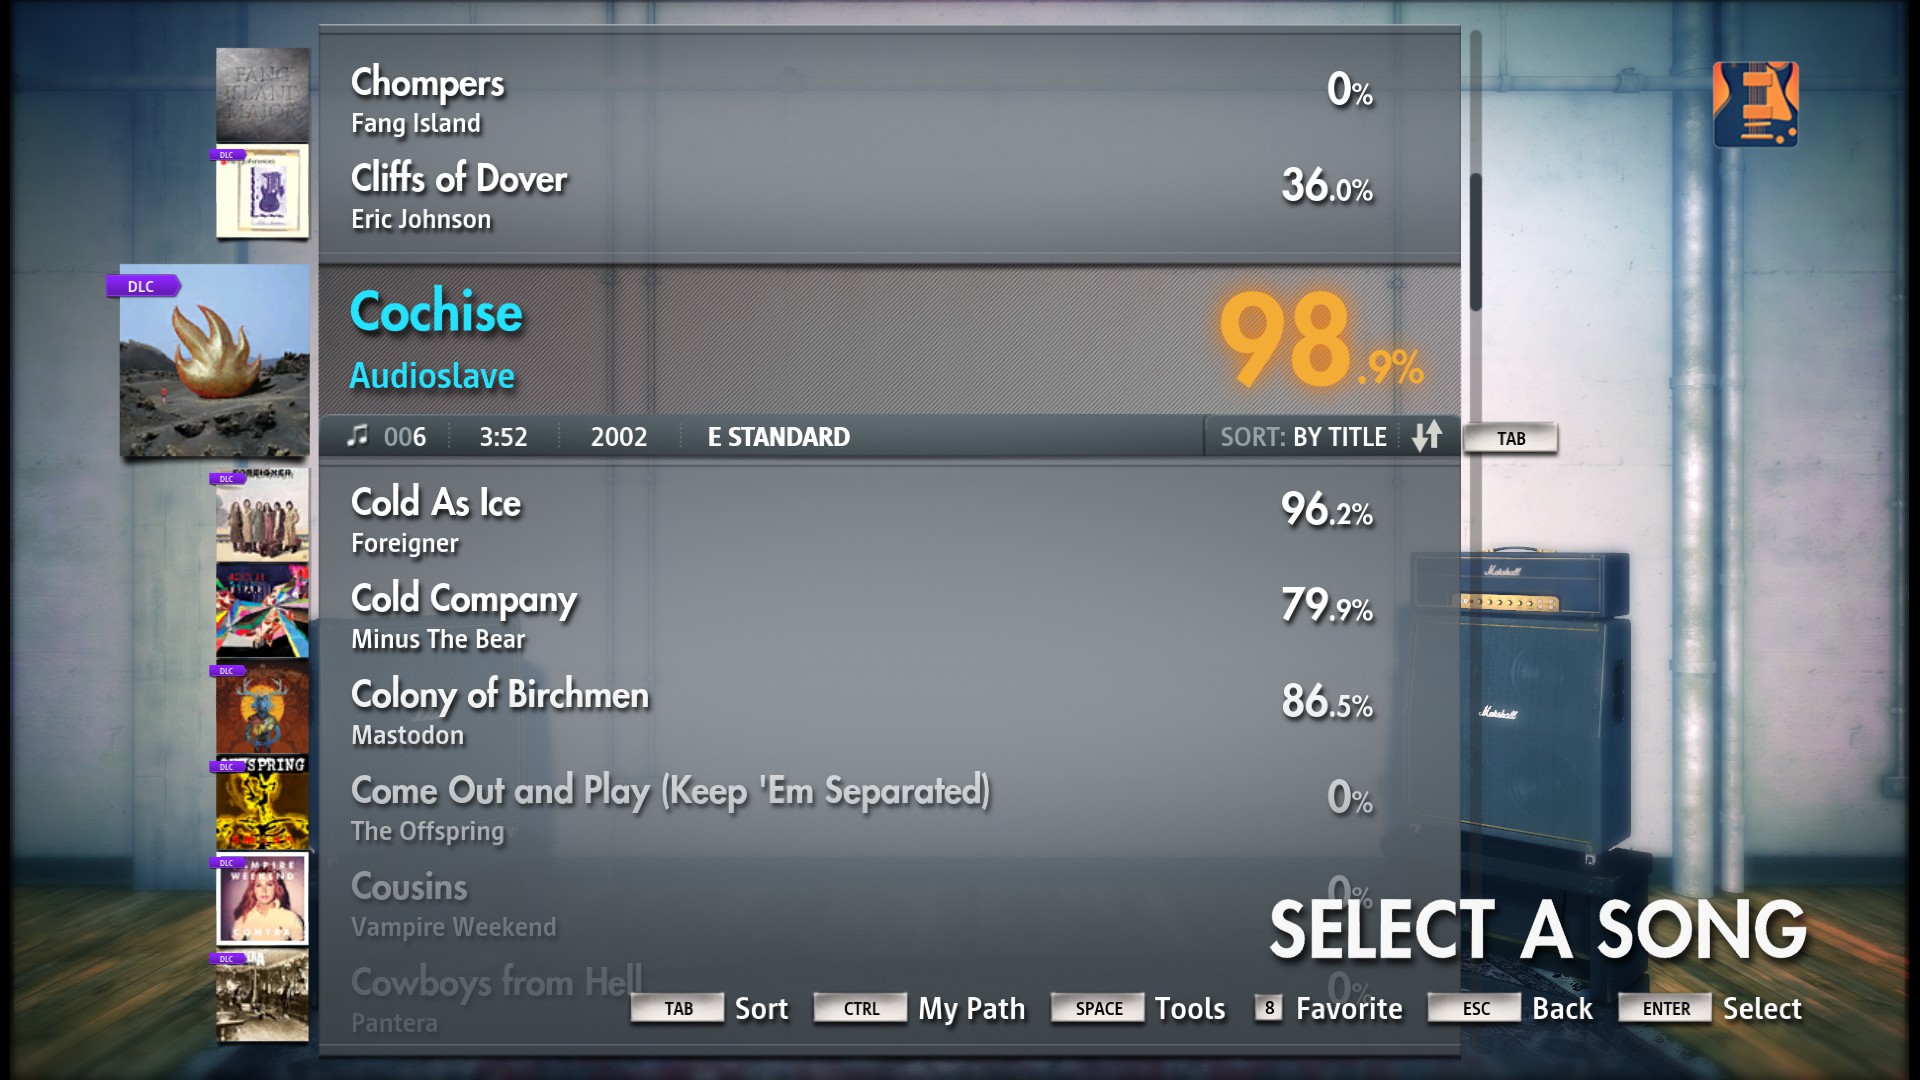 Rocksmith® 2014 – Audioslave Song Pack Featured Screenshot #1